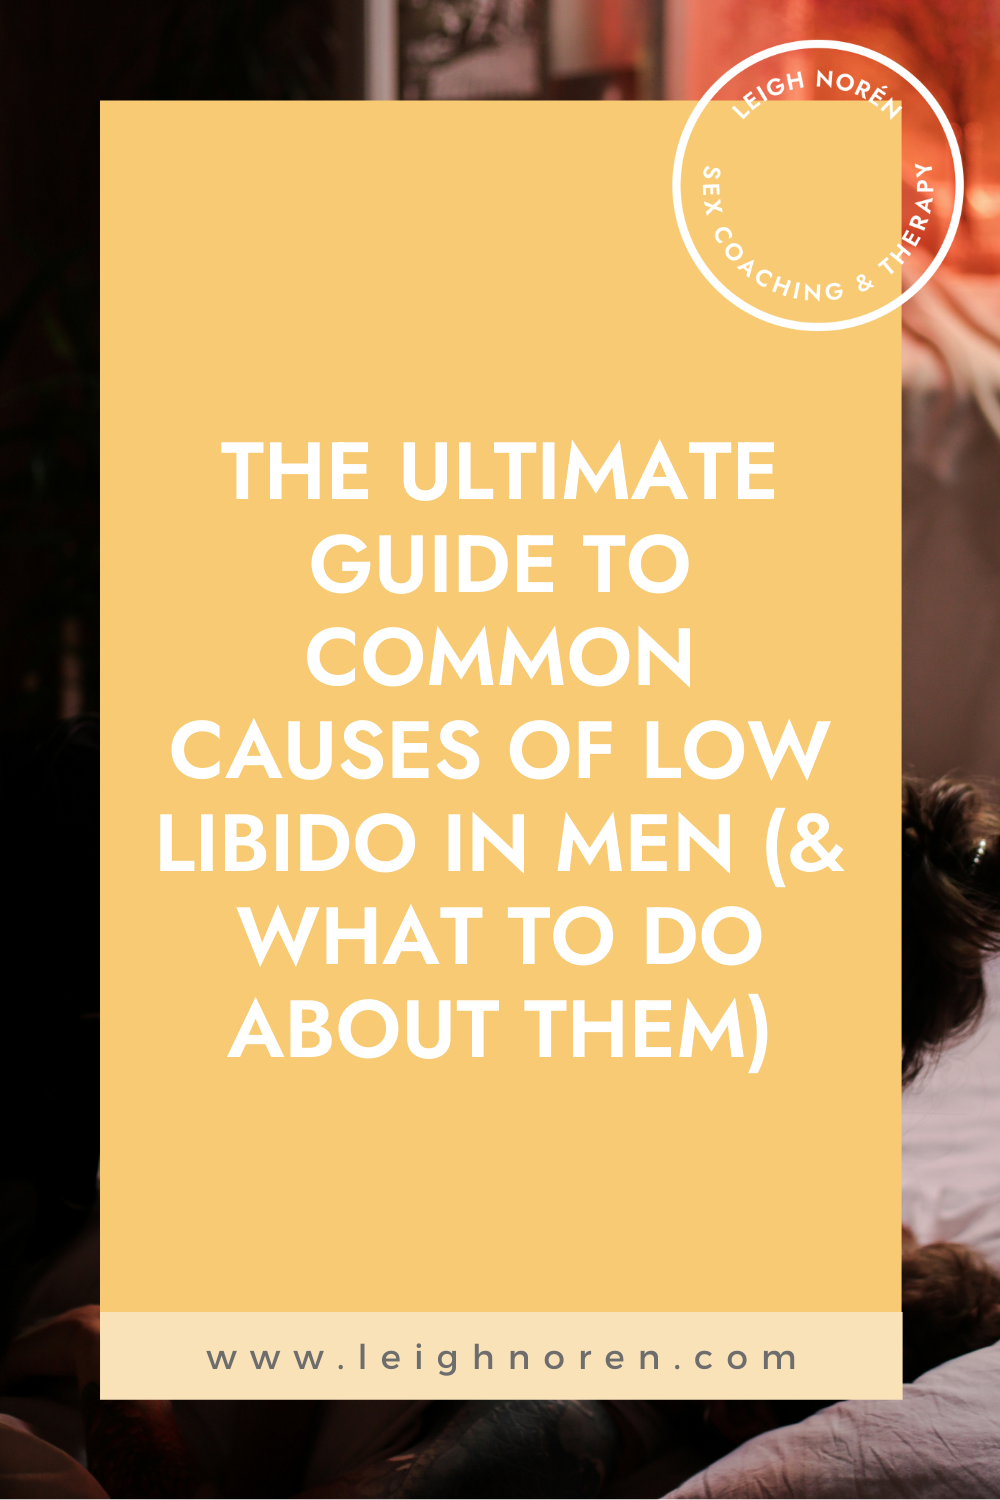 The Ultimate Guide To Common Causes Of Low Libido In Men (& What To Do About Them)